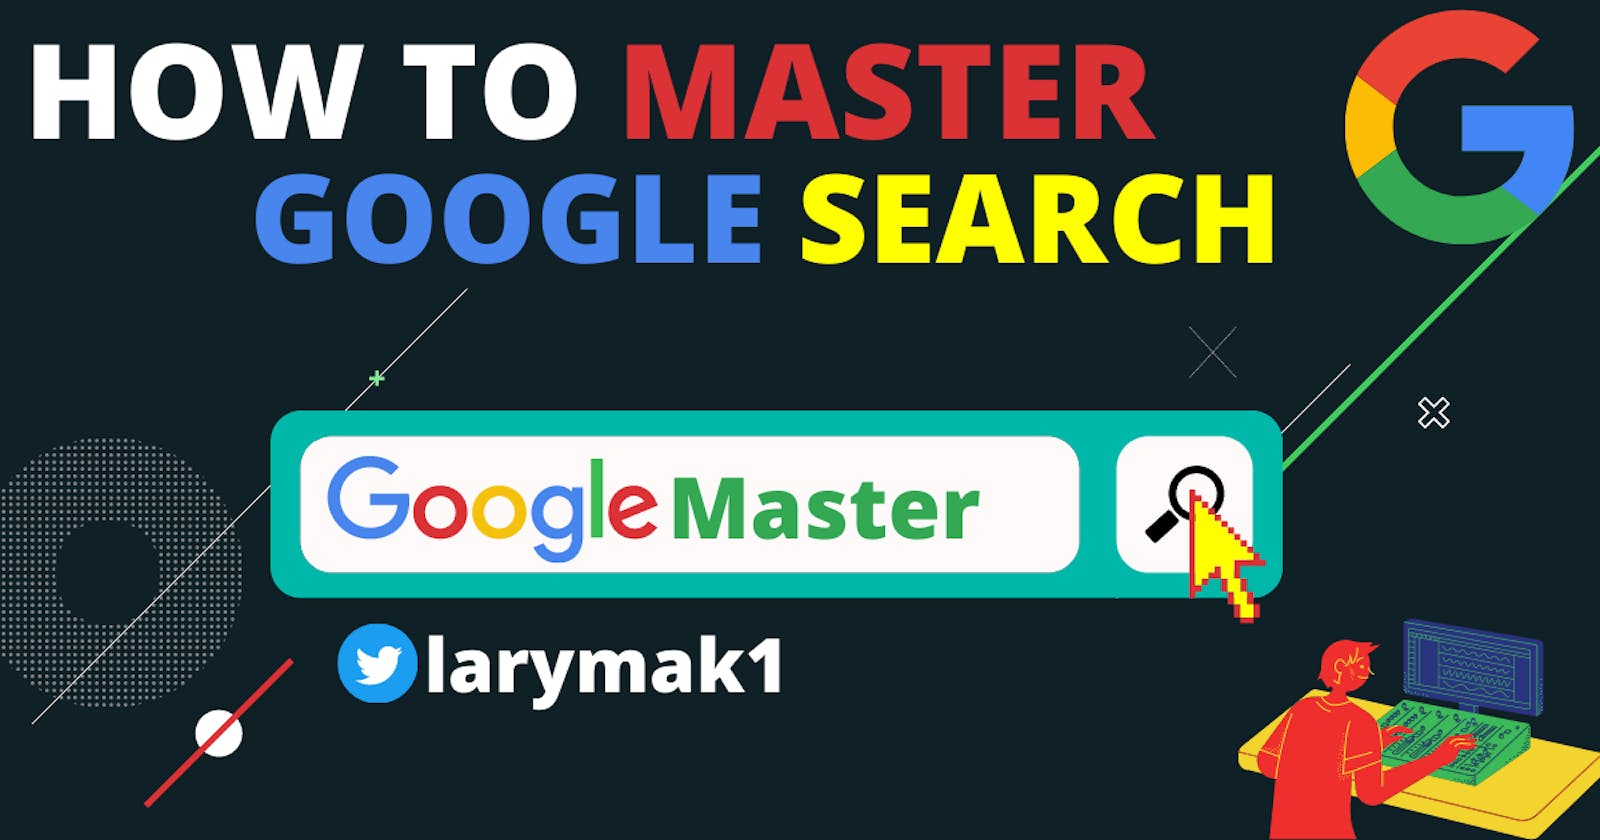 How To Master Google Search like A PRO